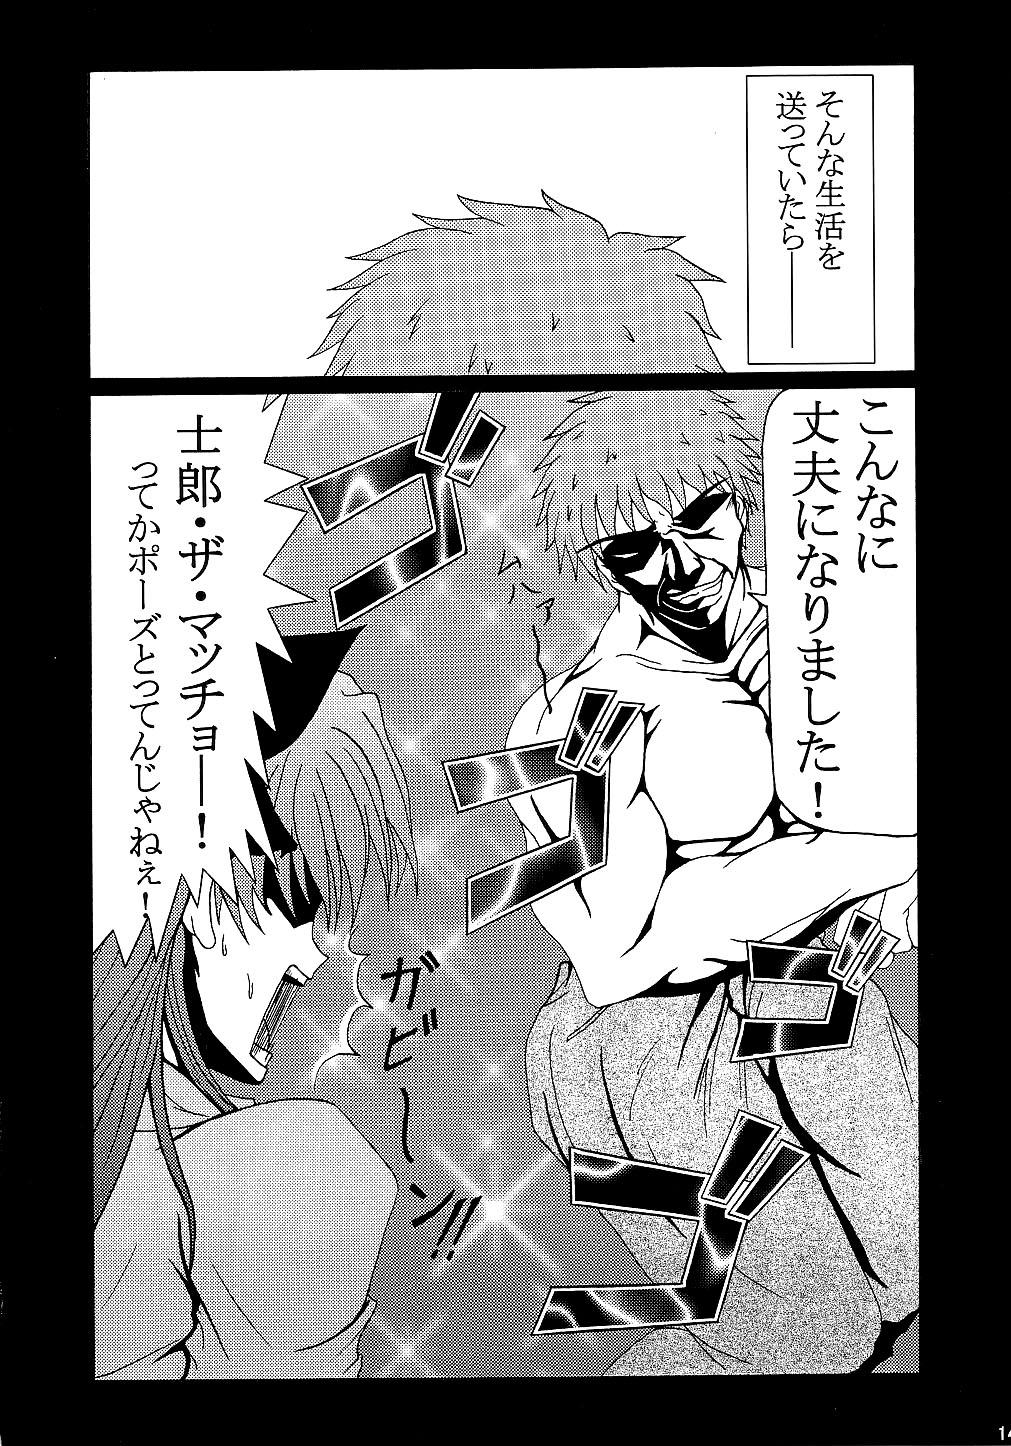 Stepson Fate na Kankei - Fate stay night Gaypawn - Page 13